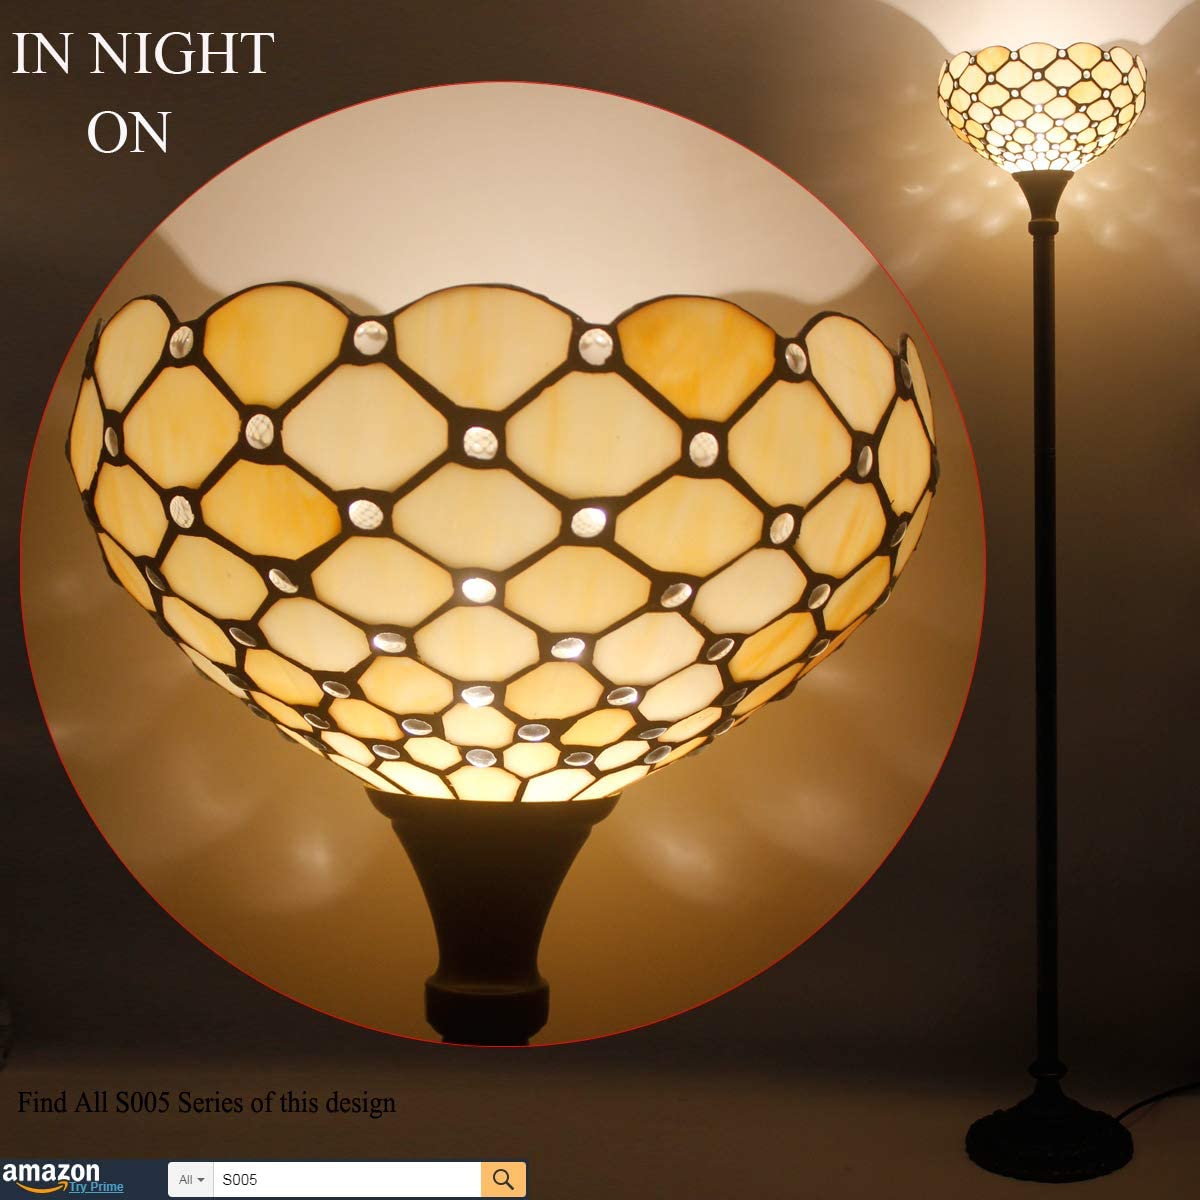 BBNBDMZ  Floor Lamp Cream Amber Stained Glass Bead Light 12X12X66 Inches Pole Torchiere Standing Corner Torch Uplight Decor Bedroom Living Room  Office (LED Bulb Included) S005 Ser